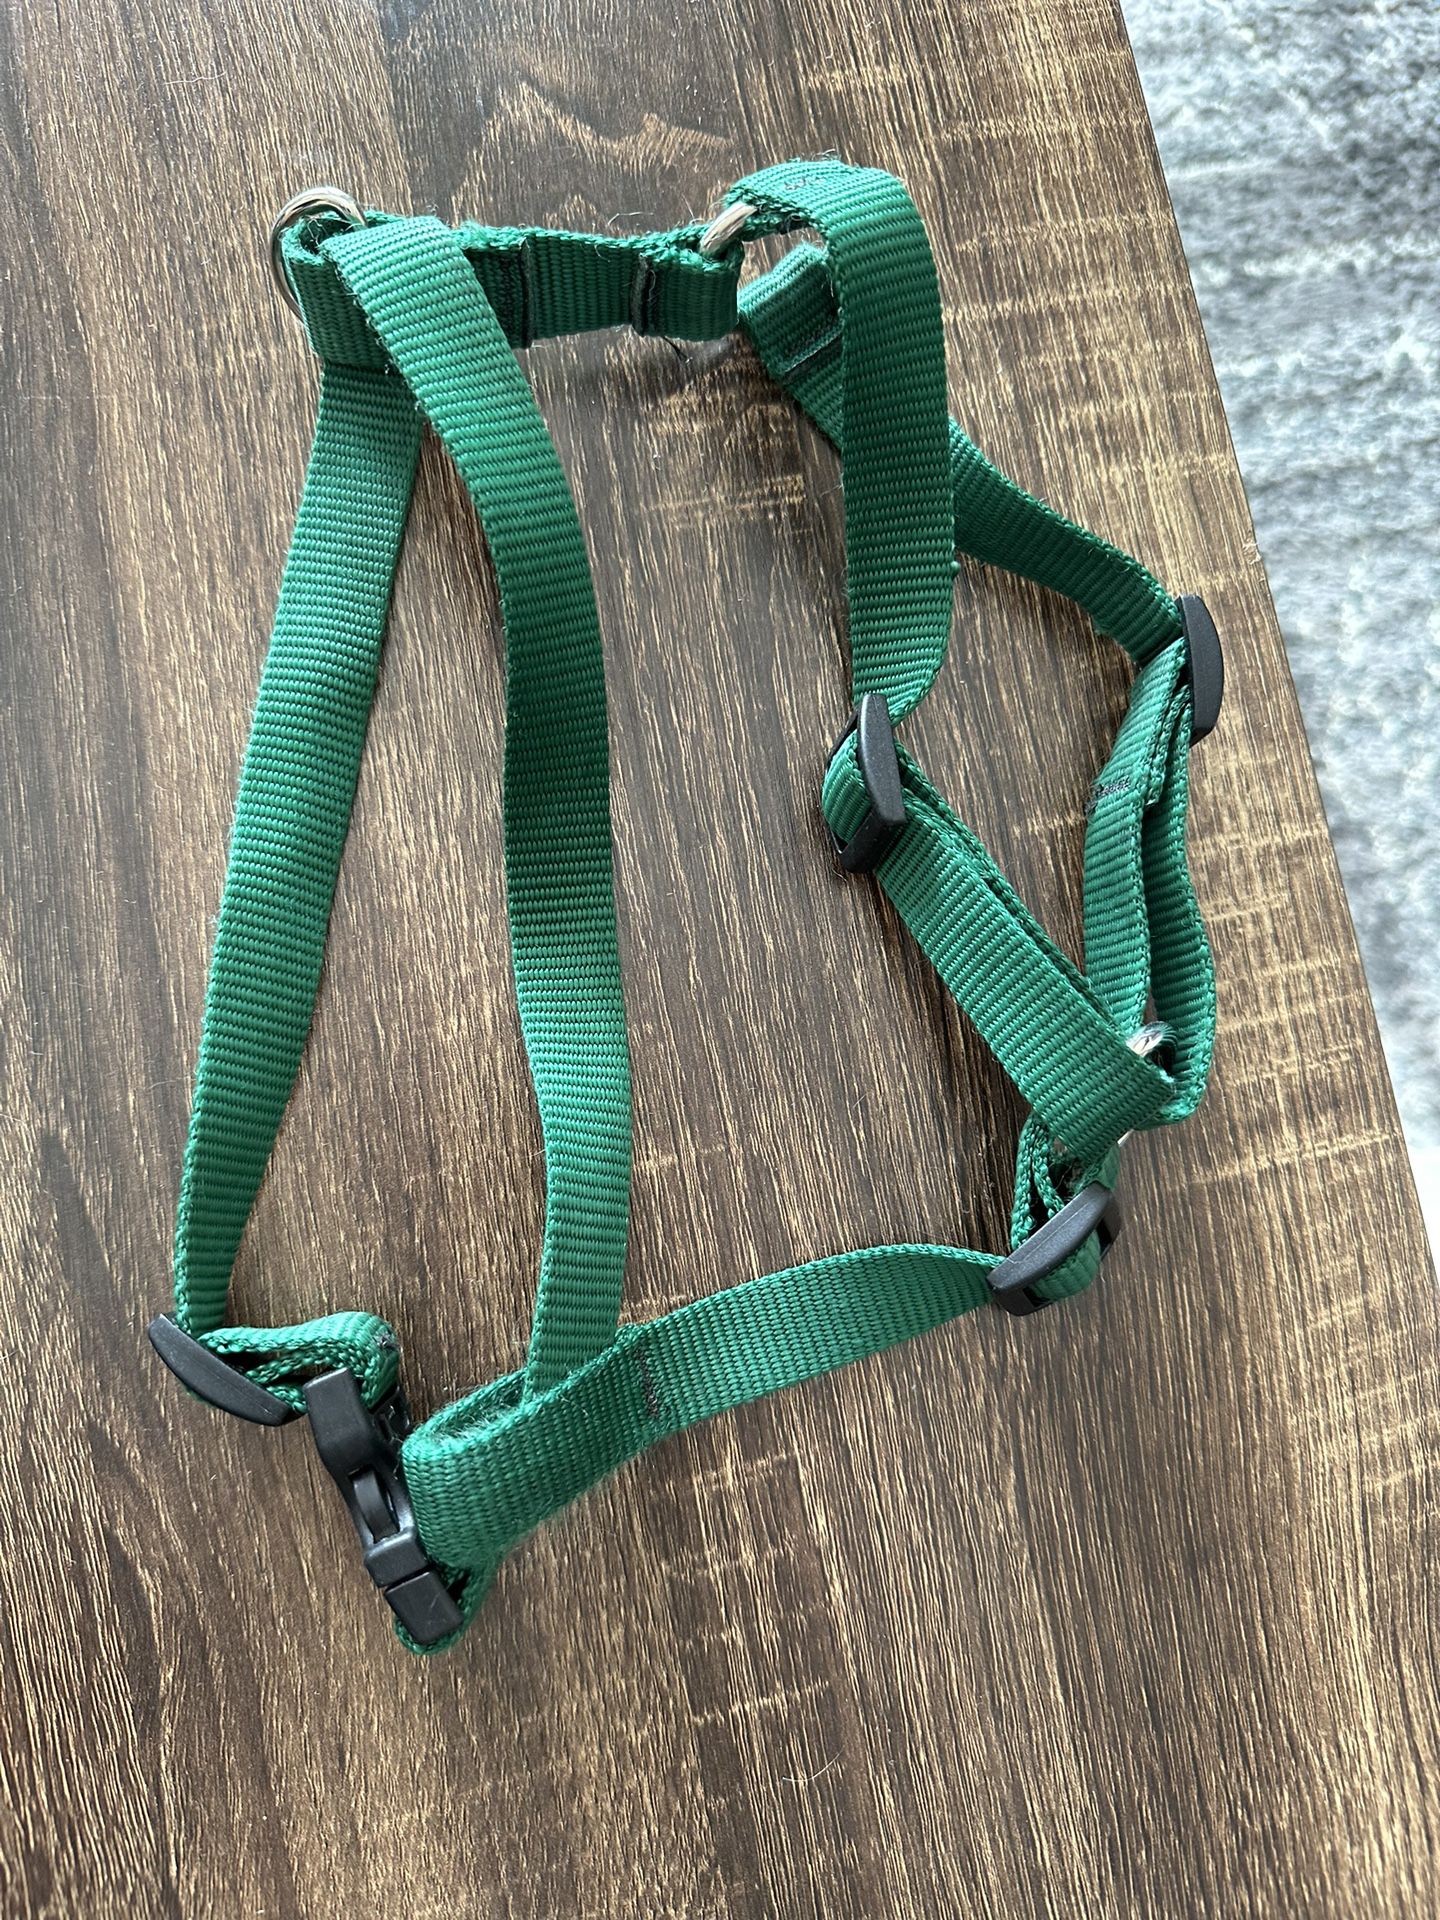 Dog Collar, Size XS for Sale in Cary, NC - OfferUp